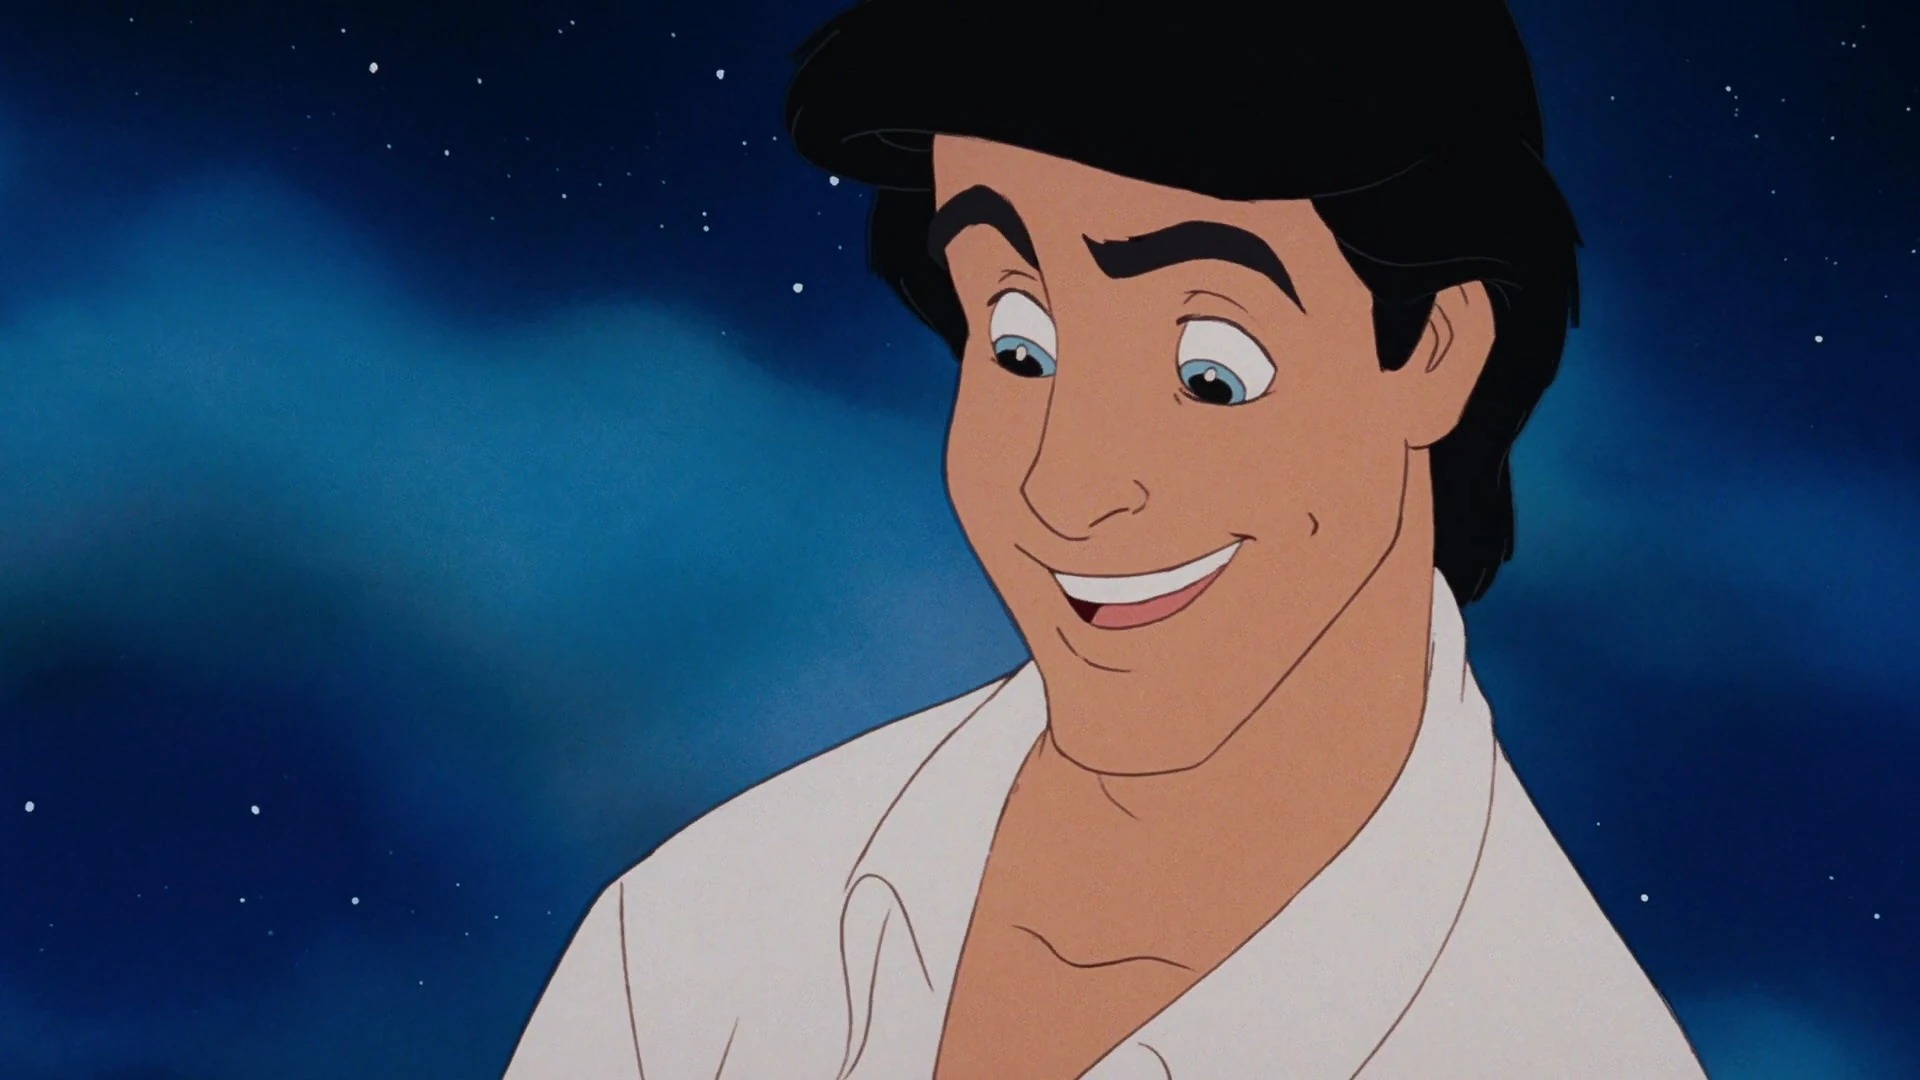 21-facts-about-prince-eric-the-little-mermaid